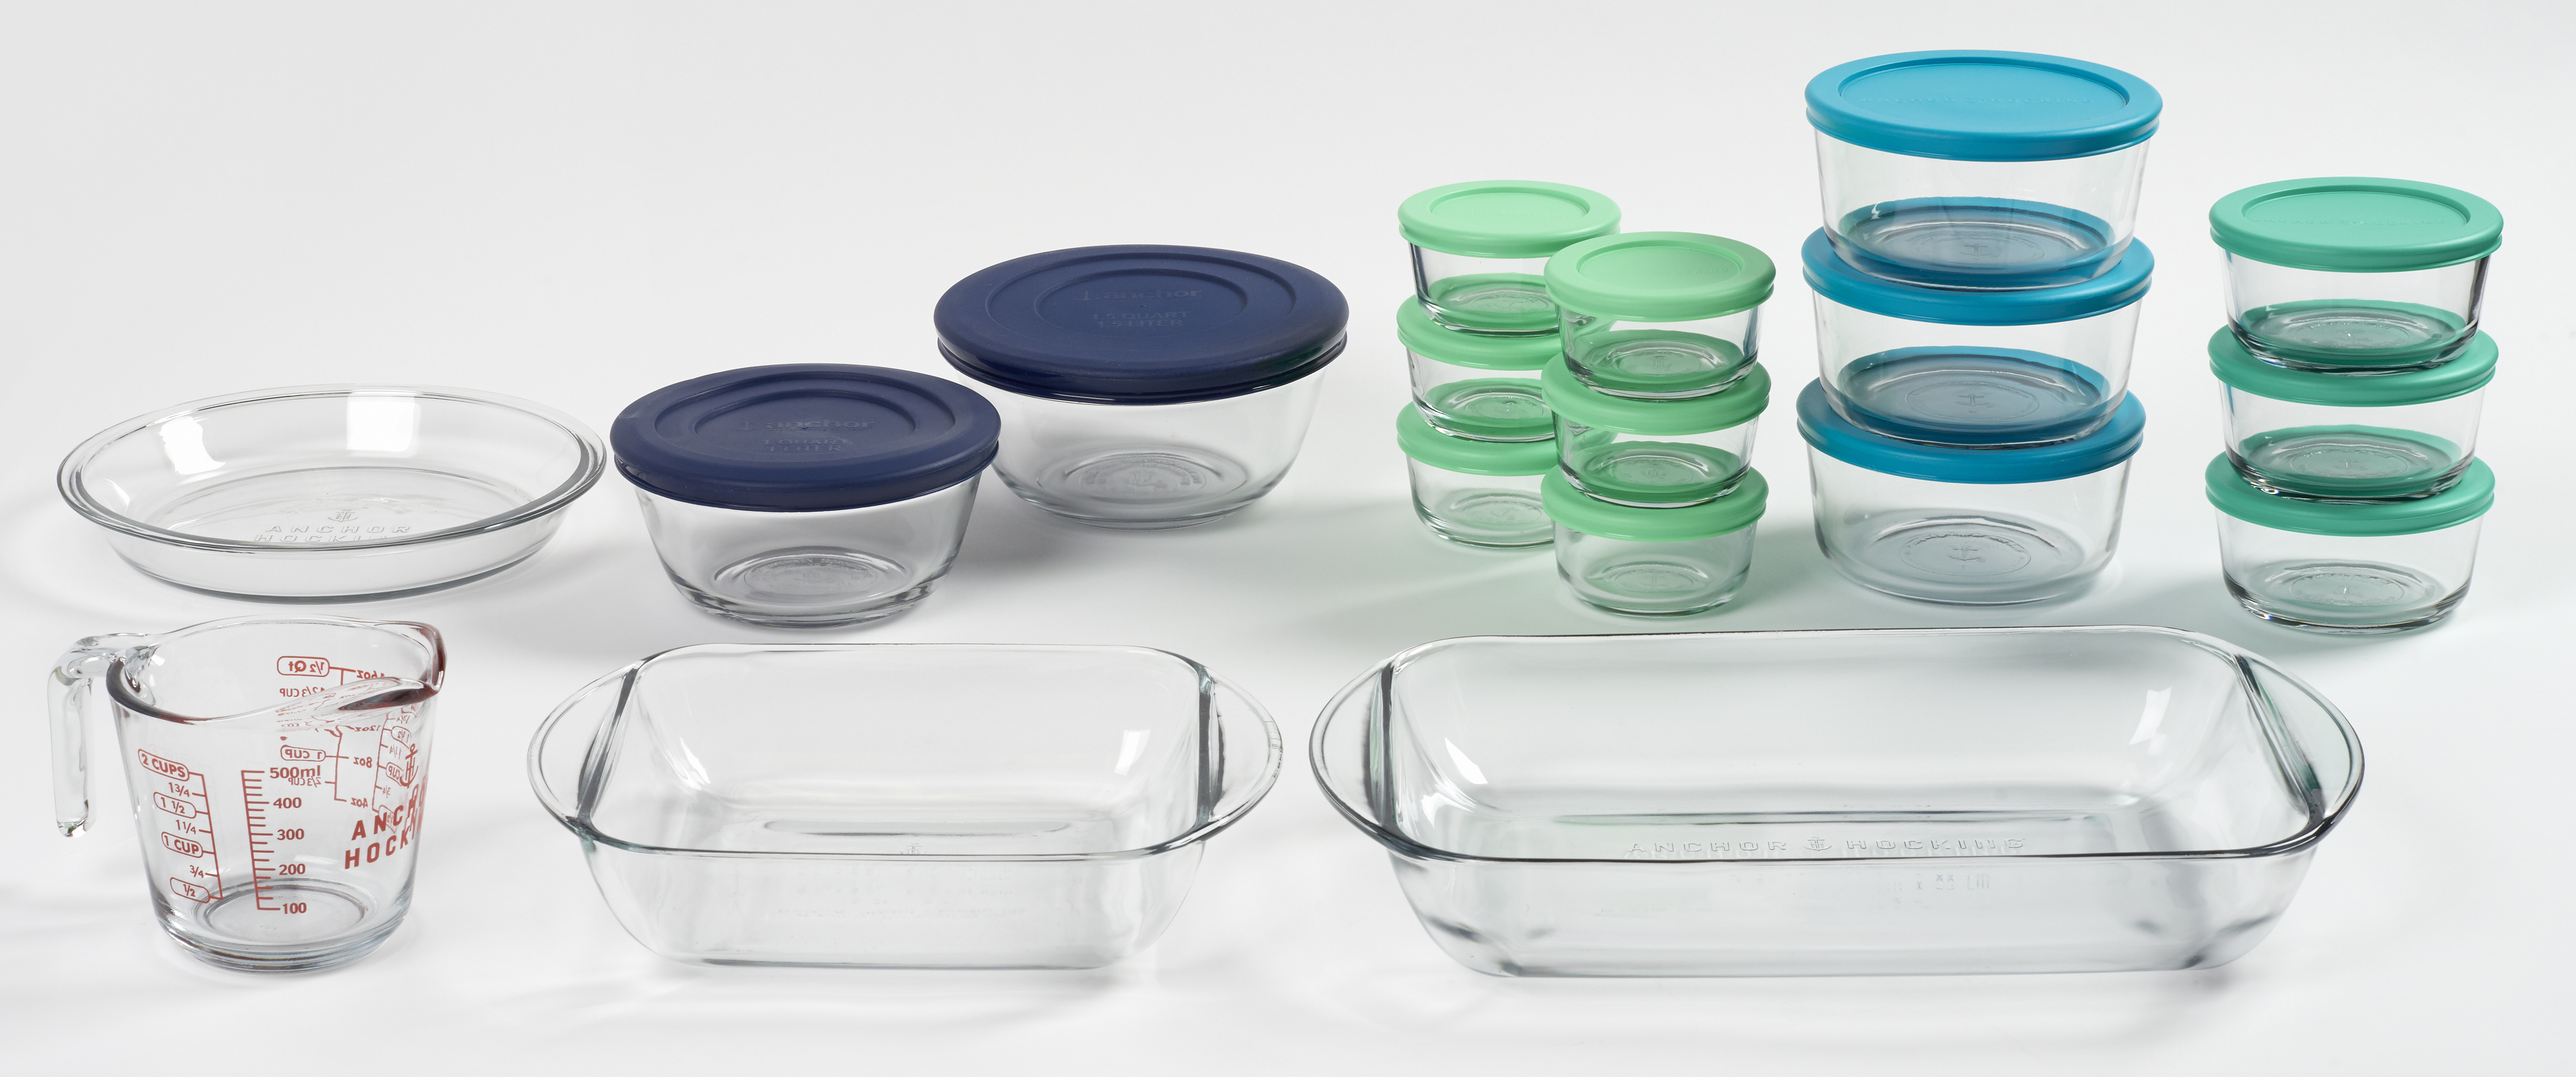 Anchor Hocking 32 Pc Bake & Store Glass Set with SnugFit multicolor lids